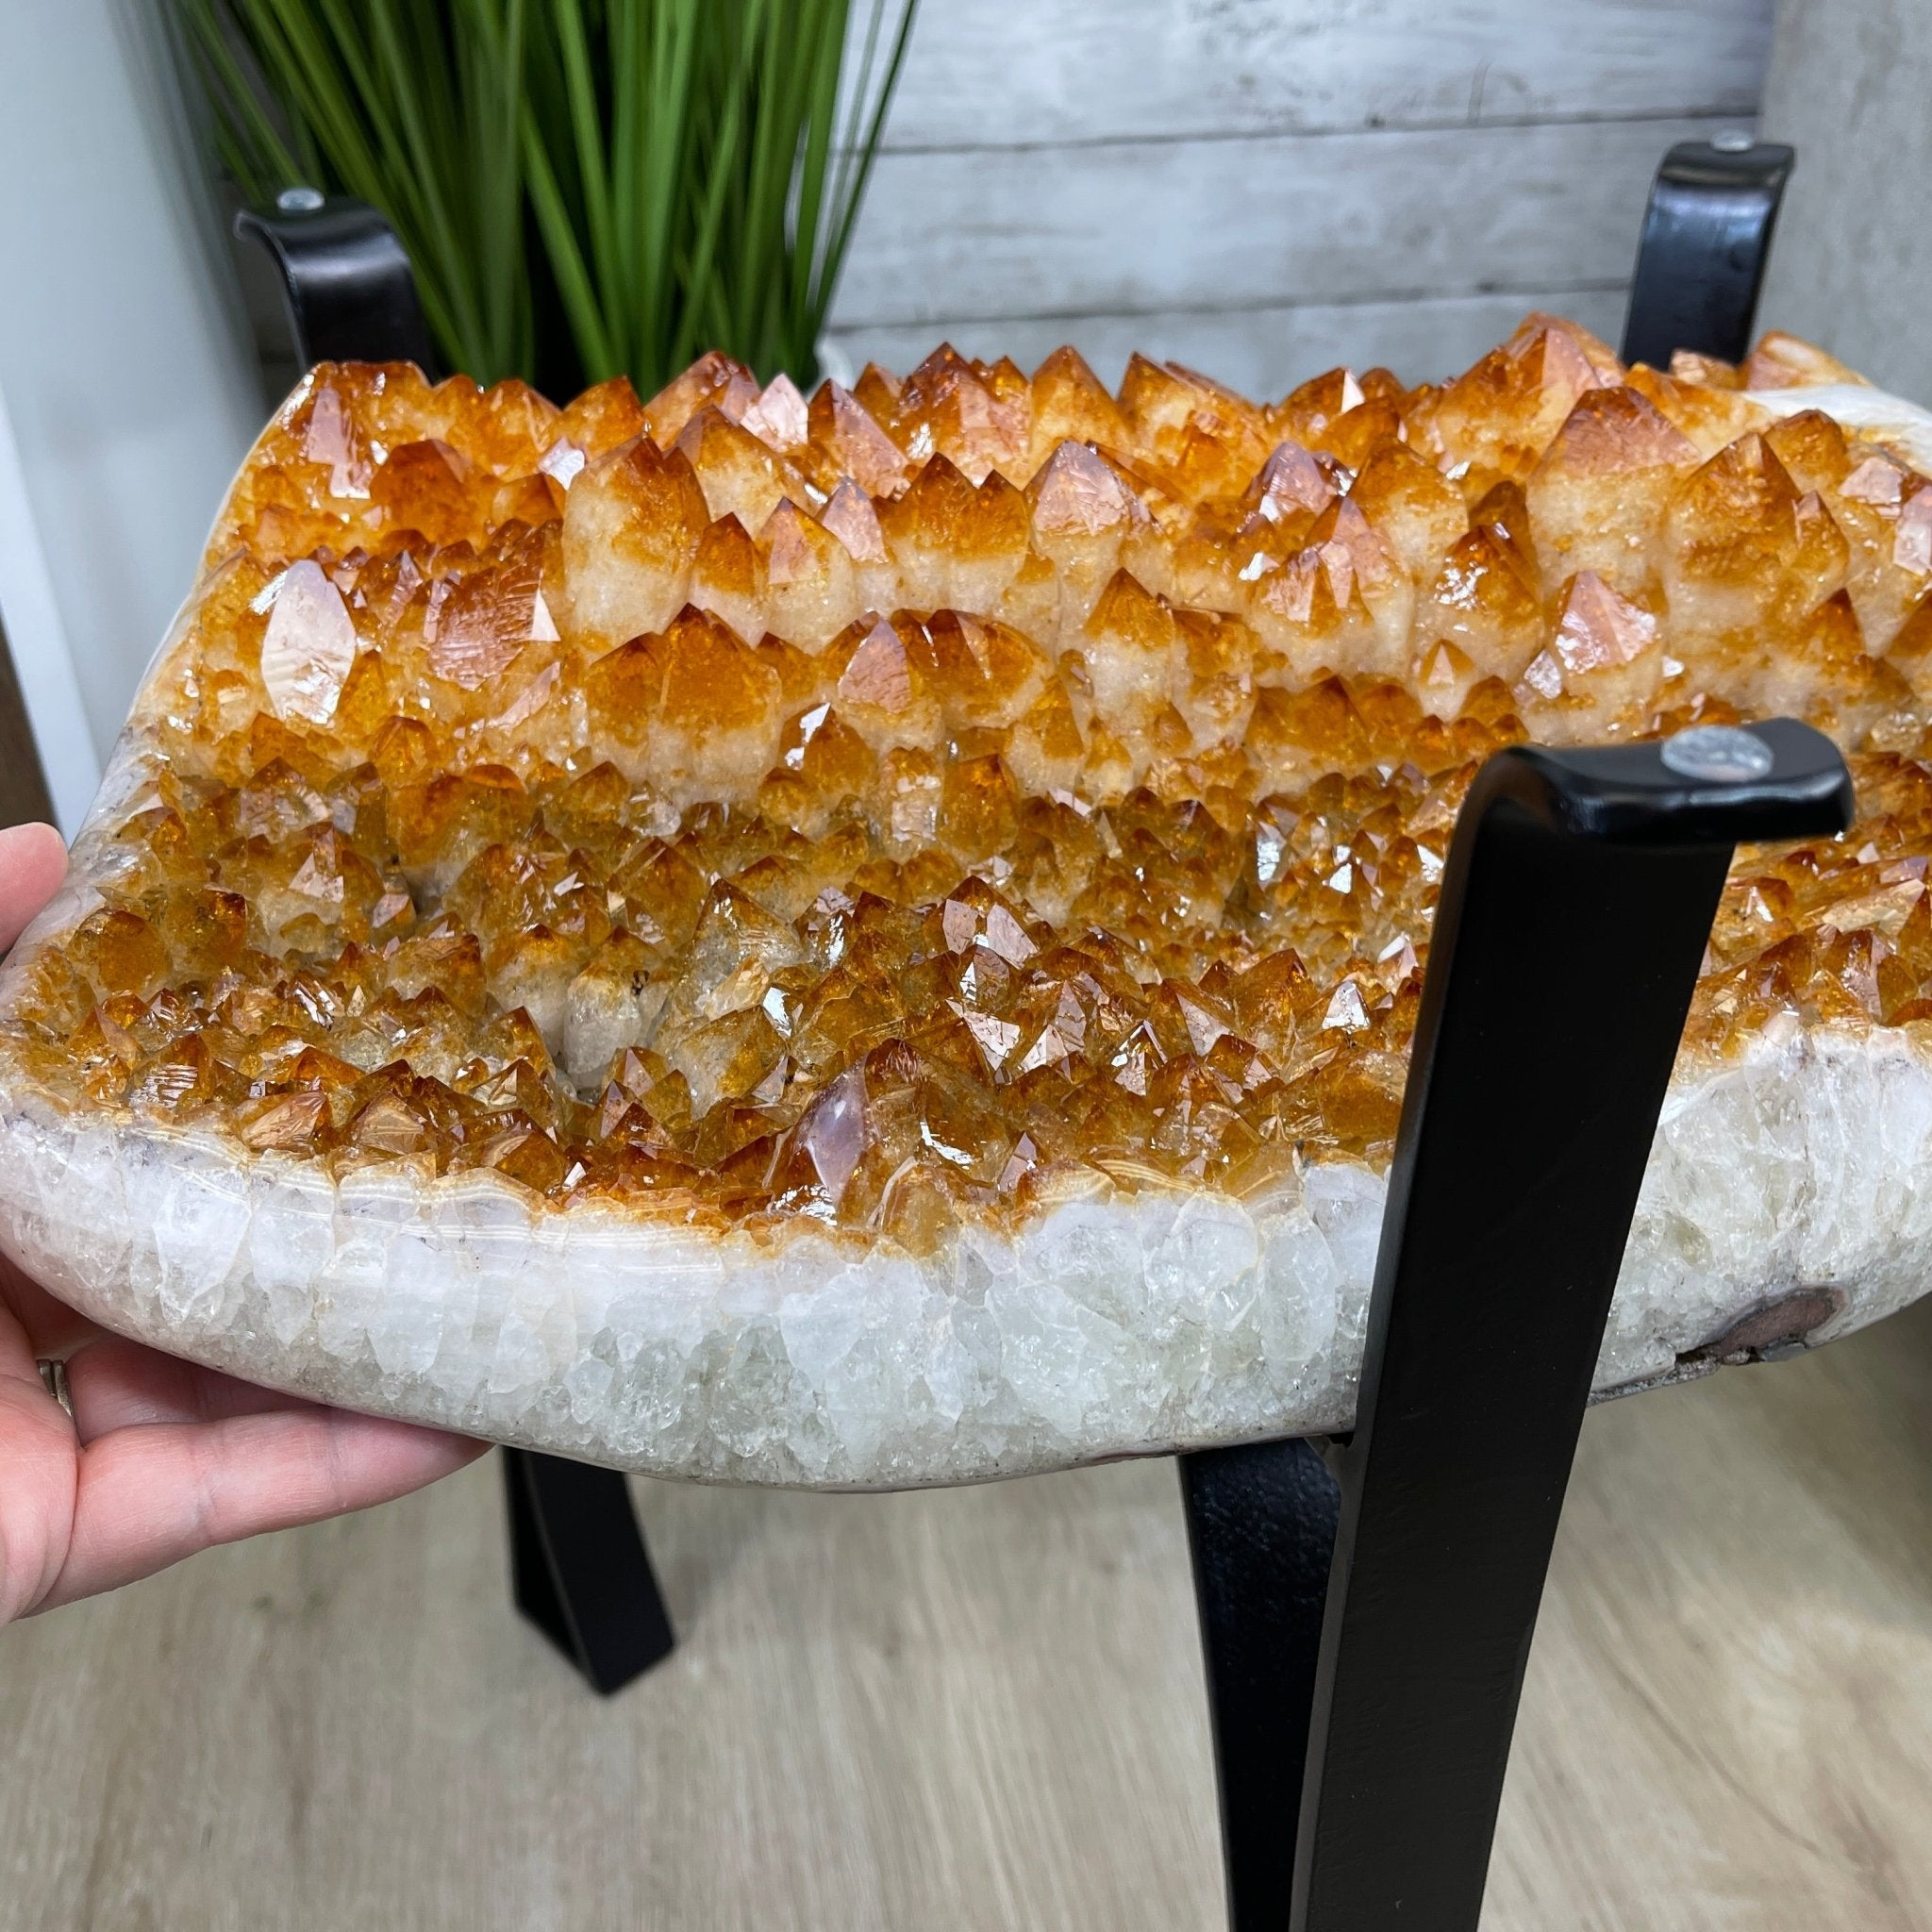 Extra Plus Quality Brazilian Citrine Geode Coffee Table, 53.3 lbs, 17.8" tall on metal base #1386-0017 by Brazil Gems - Brazil GemsBrazil GemsExtra Plus Quality Brazilian Citrine Geode Coffee Table, 53.3 lbs, 17.8" tall on metal base #1386-0017 by Brazil GemsTables: Coffee1386-0017